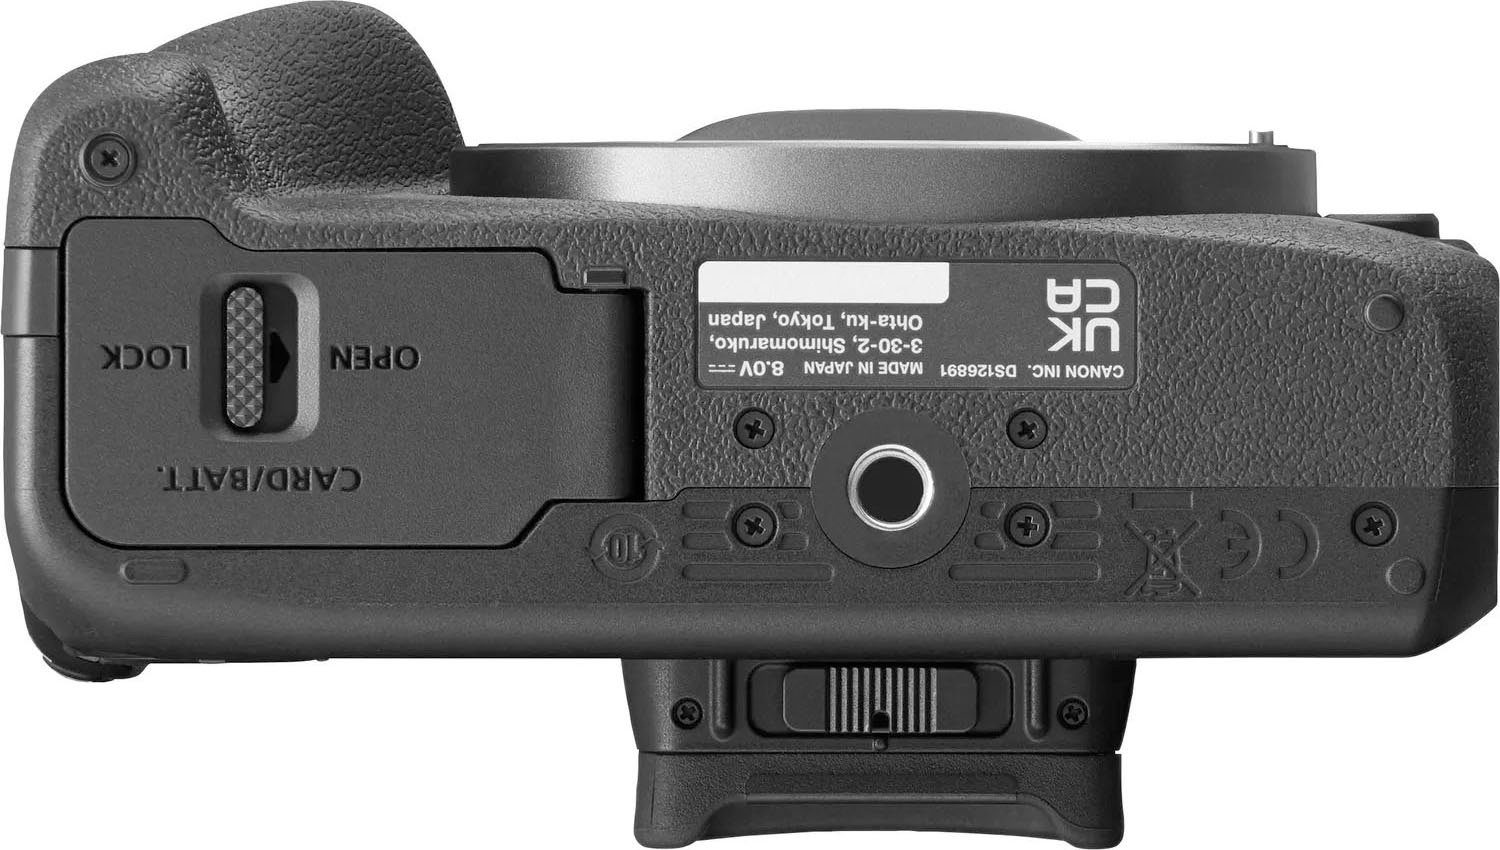 STM Canon R100 WLAN) 24,1 + Bluetooth, MP, STM, 18-45mm Kit F4.5-6.3 (RF-S F4.5-6.3 18-45mm IS RF-S EOS Systemkamera IS